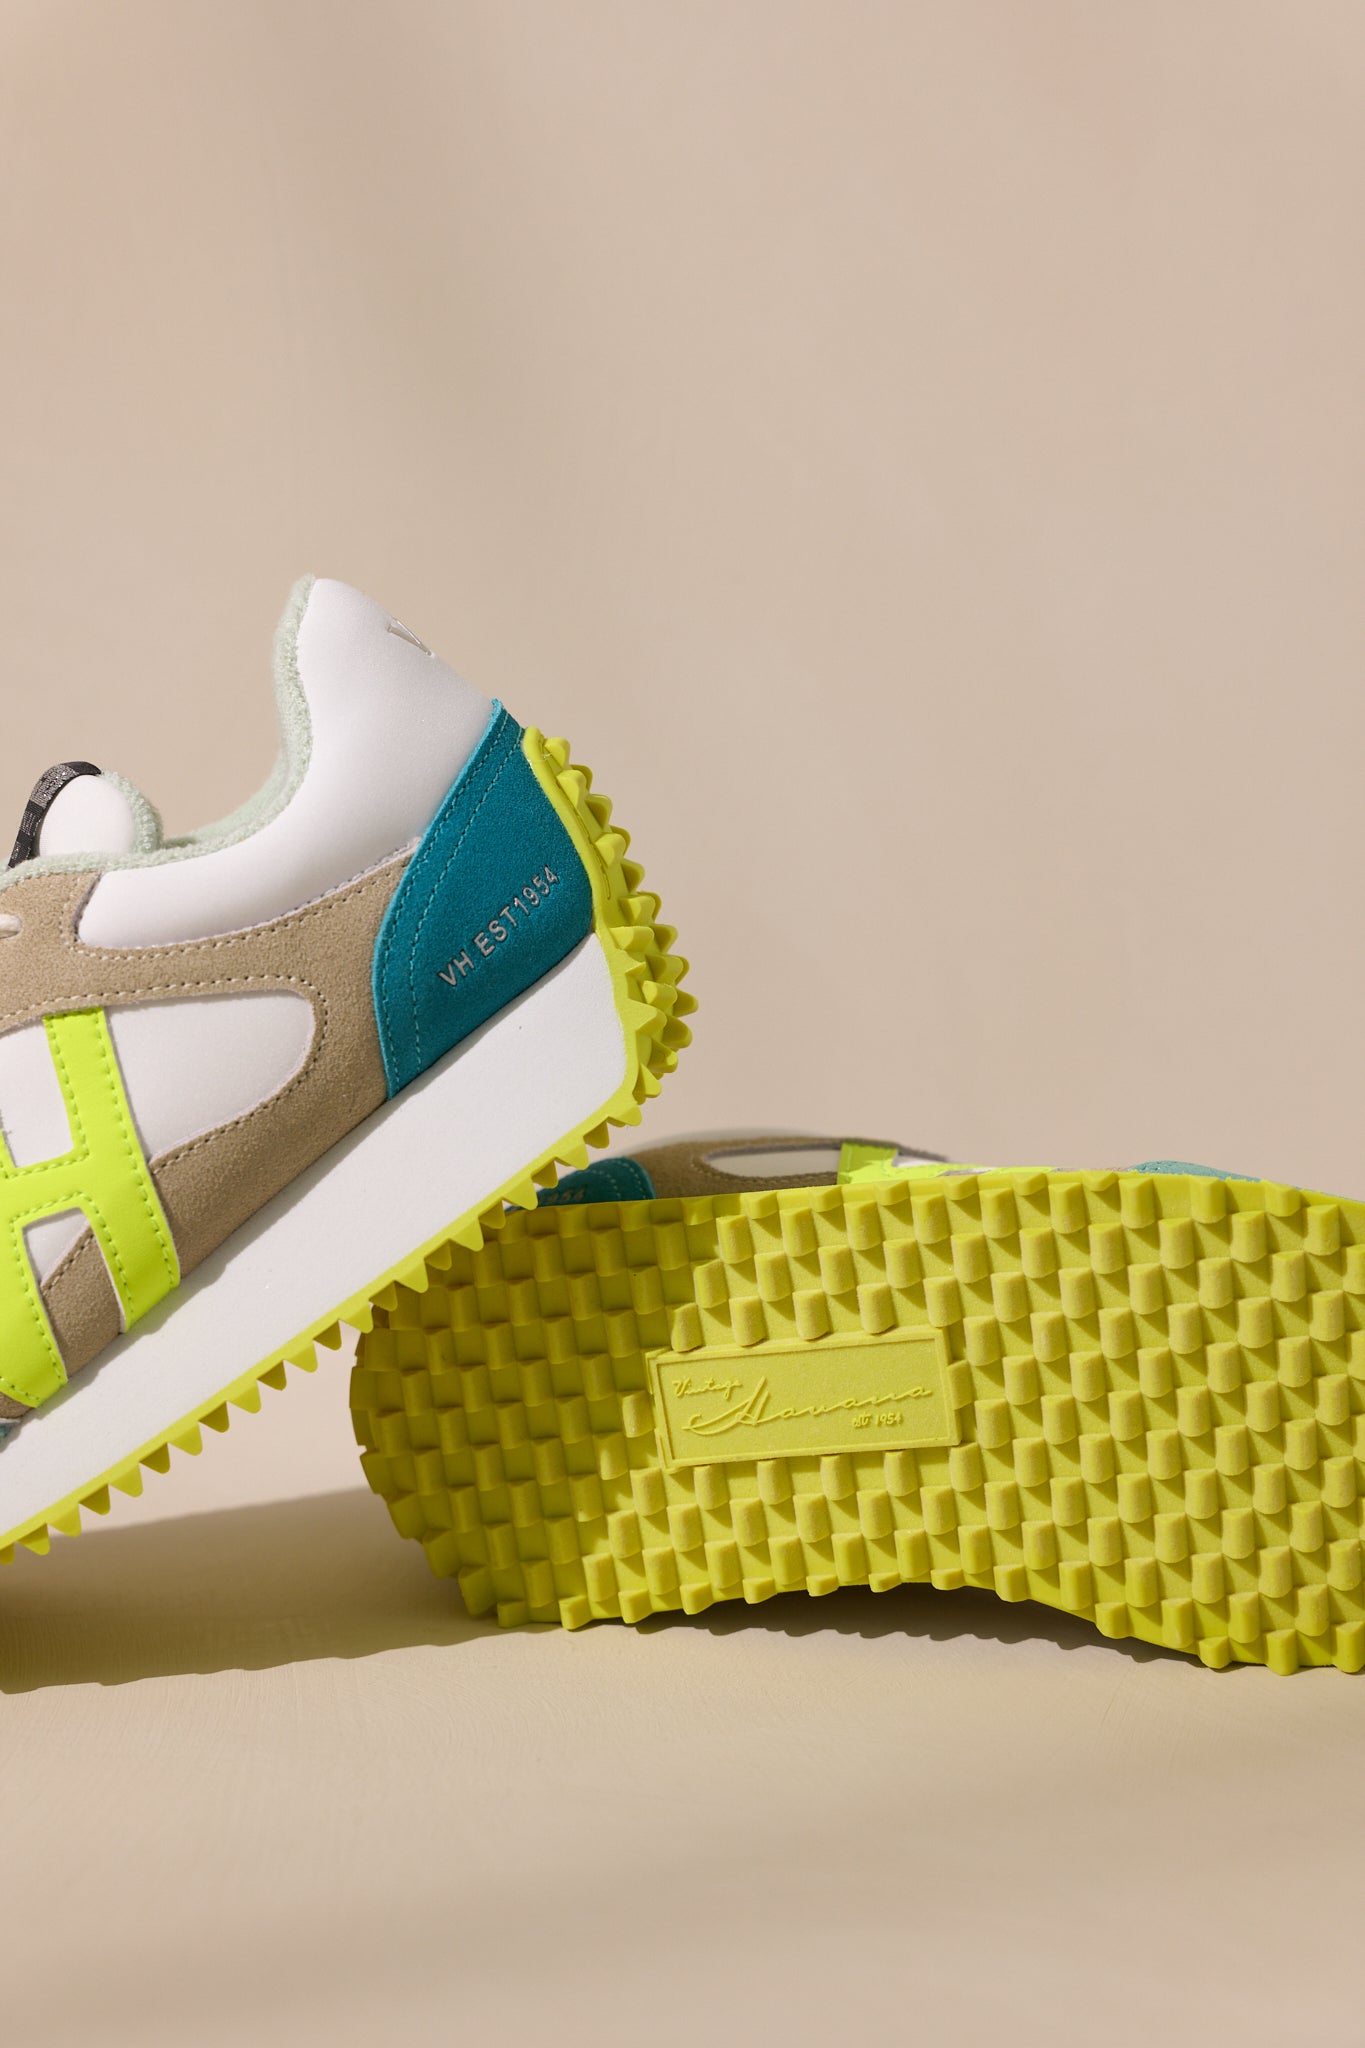 Below view of these neon yellow sneakers feature a rounded toe, functional laces, subtle pops of color, a slight platform, and a heavily textured sole.